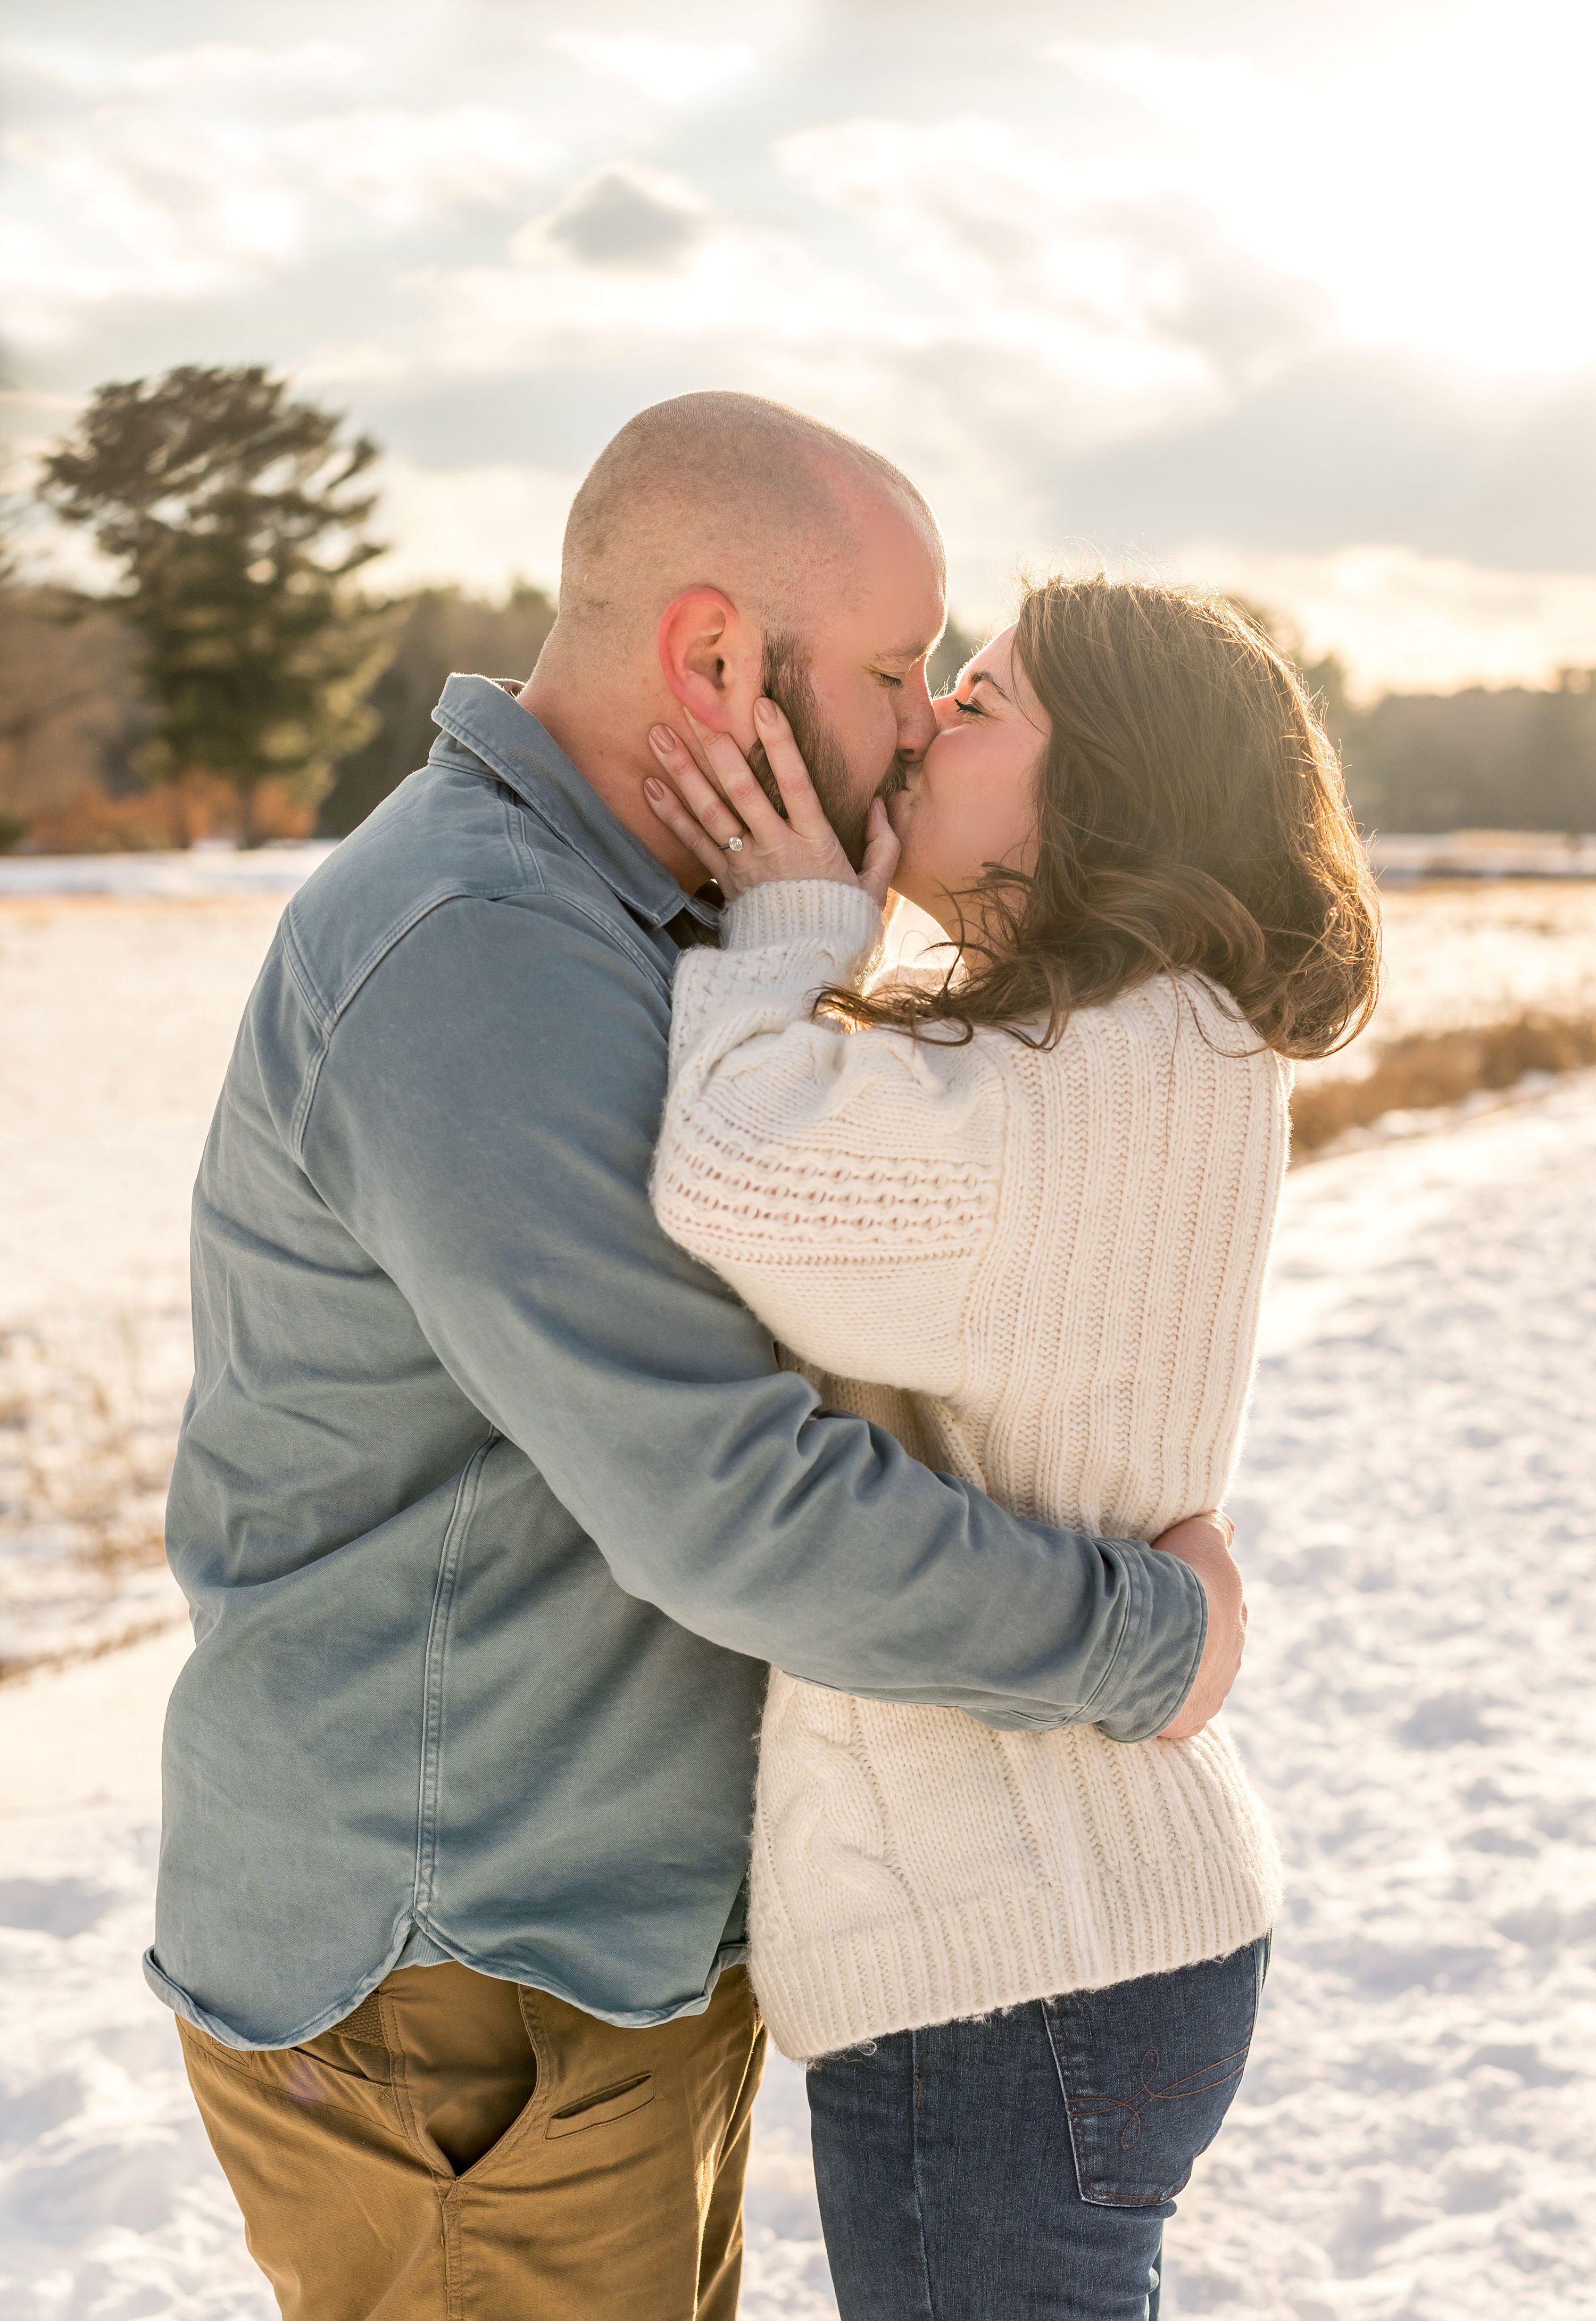 Boston Area Winter Engagement Photos in the Snow, Chelmsford, MA 